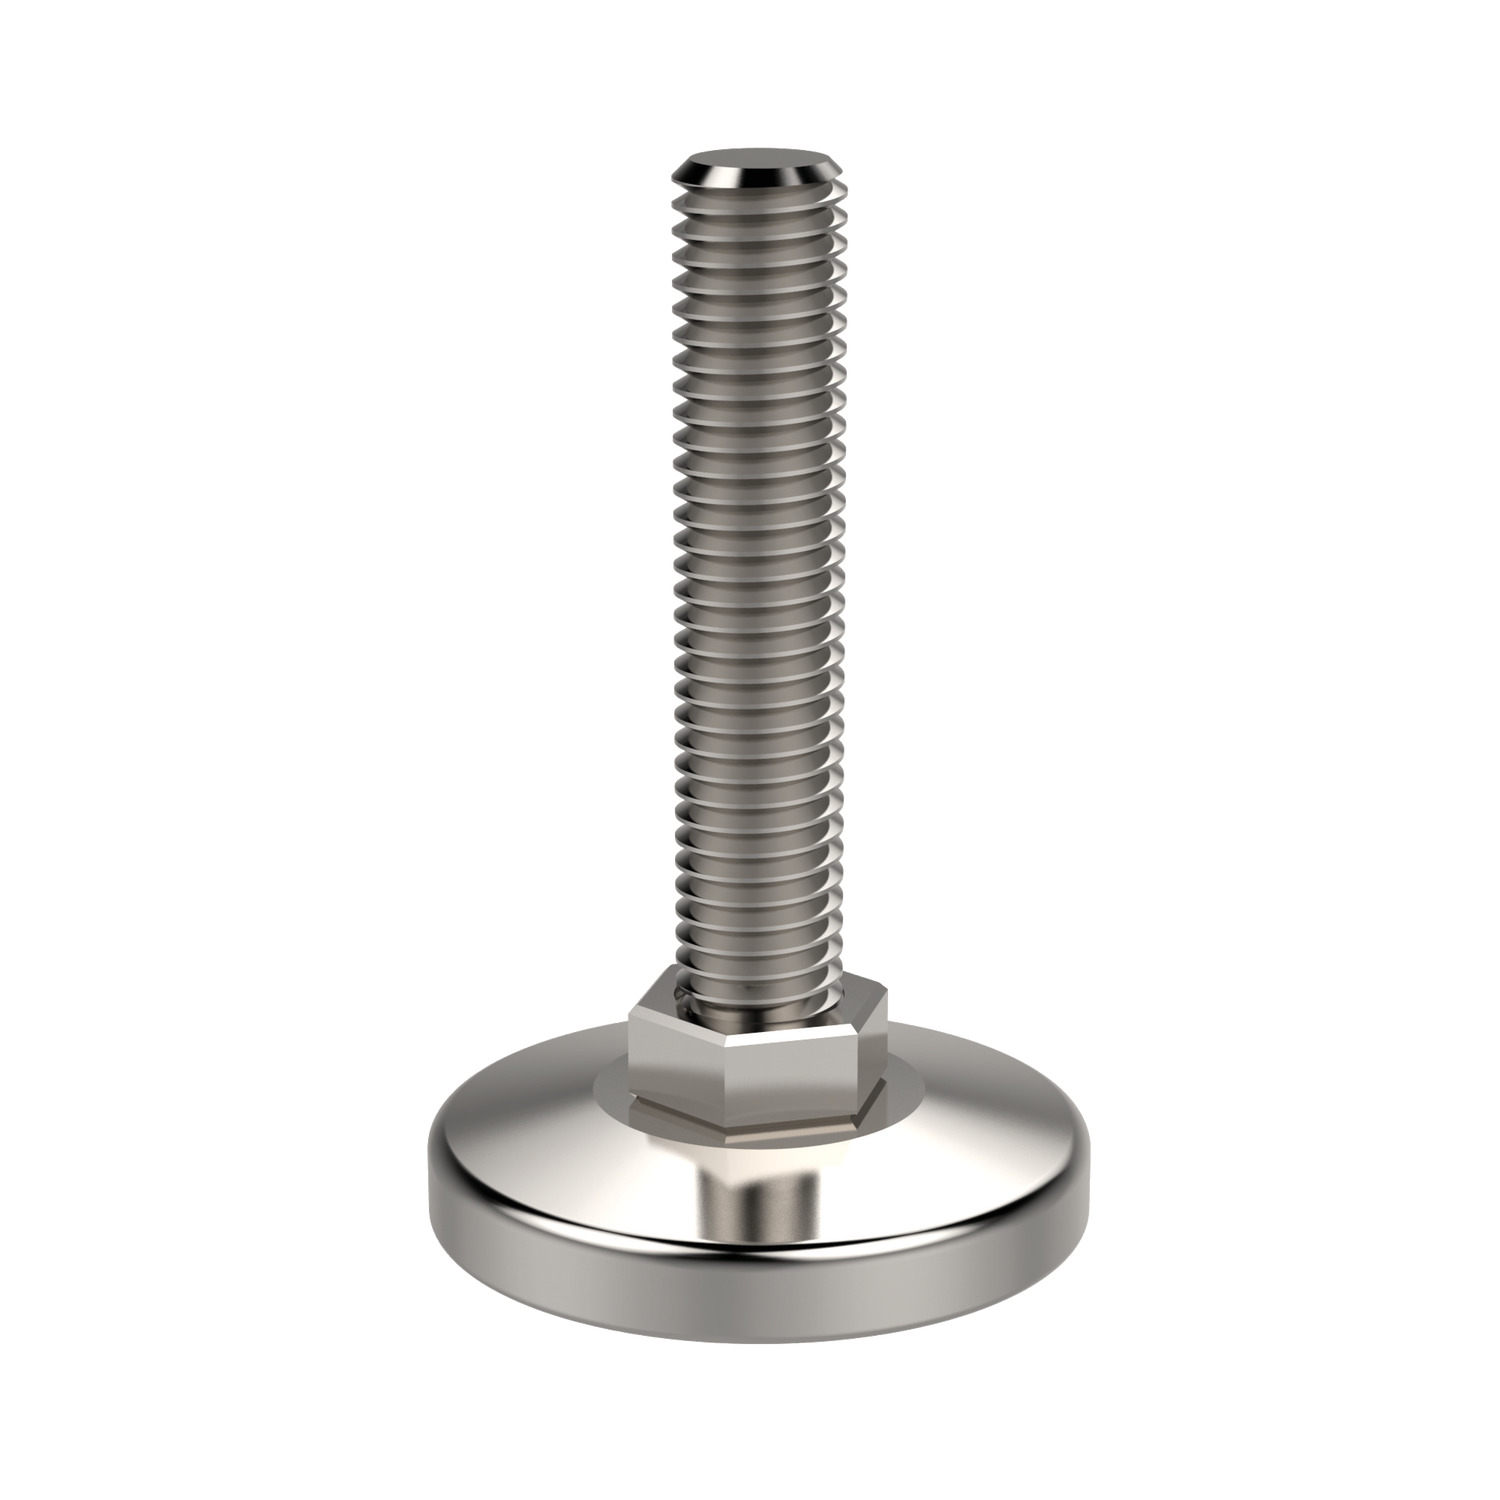 Mini Levelling Feet Miniature medium load stainless levelling feet. Made from AISI 304 stainless steel, with 316 available on request.